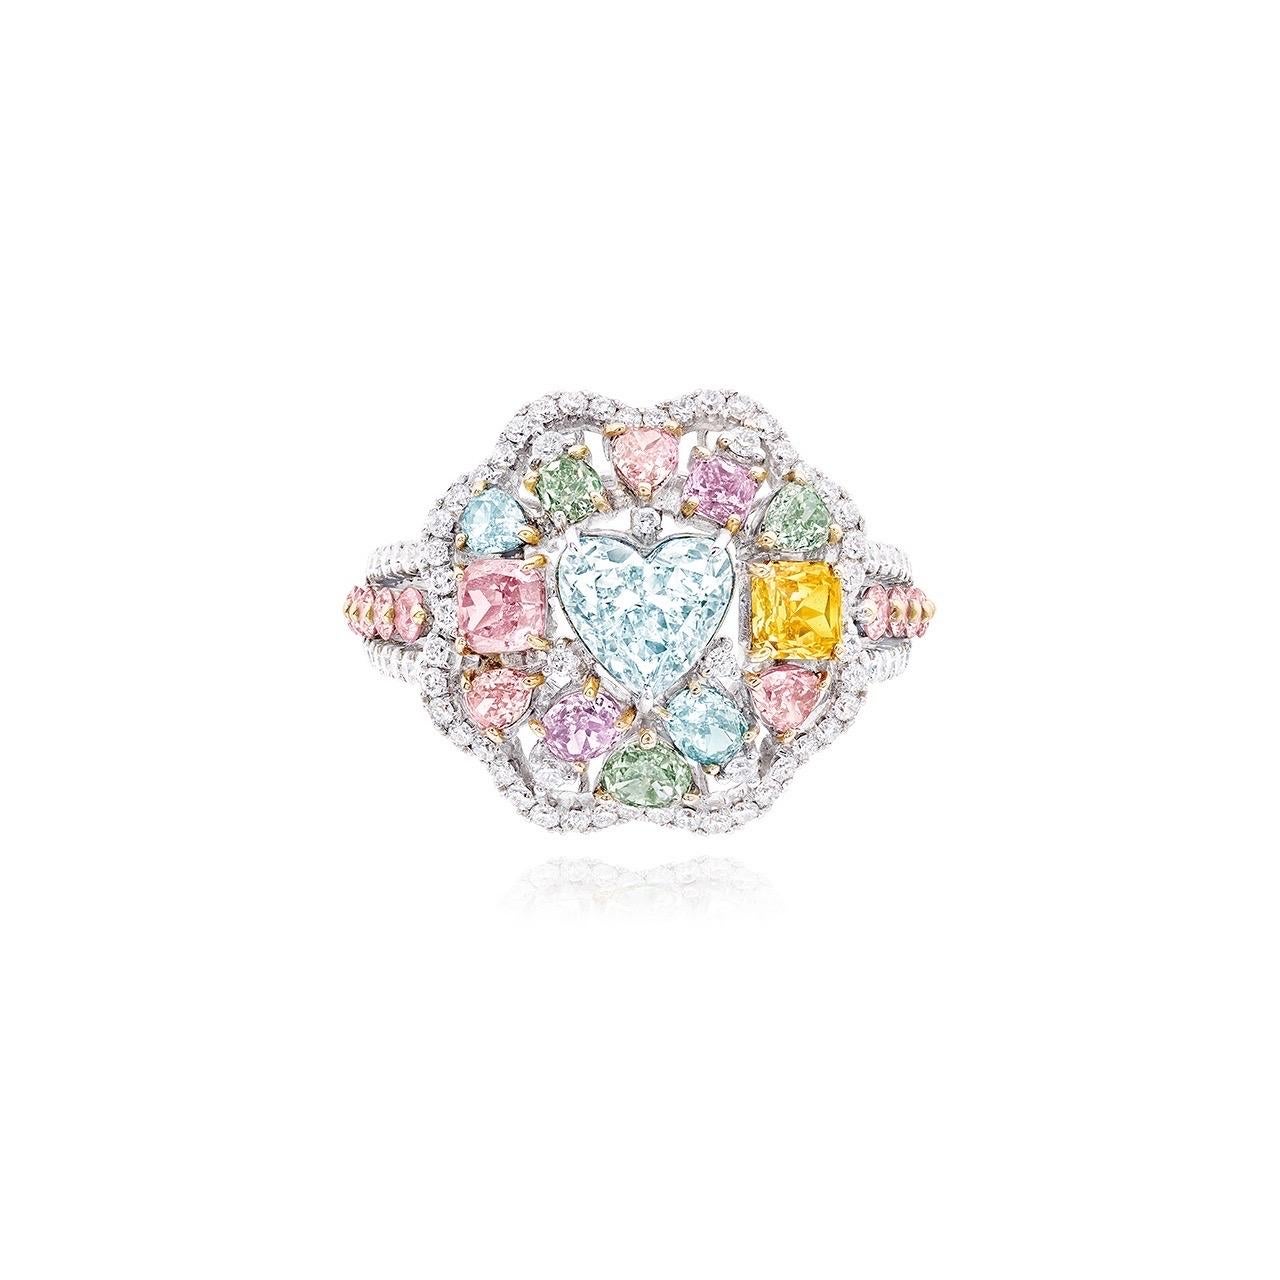 Main stone: 1.00+ carat Very Light Blue, SI2, Heart
A truly unique and special ring featuring an array of natural fancy color diamonds. 
Setting: 12 fancy colored diamonds totaling approximately 1.48 carats, 10 round pink diamonds totaling